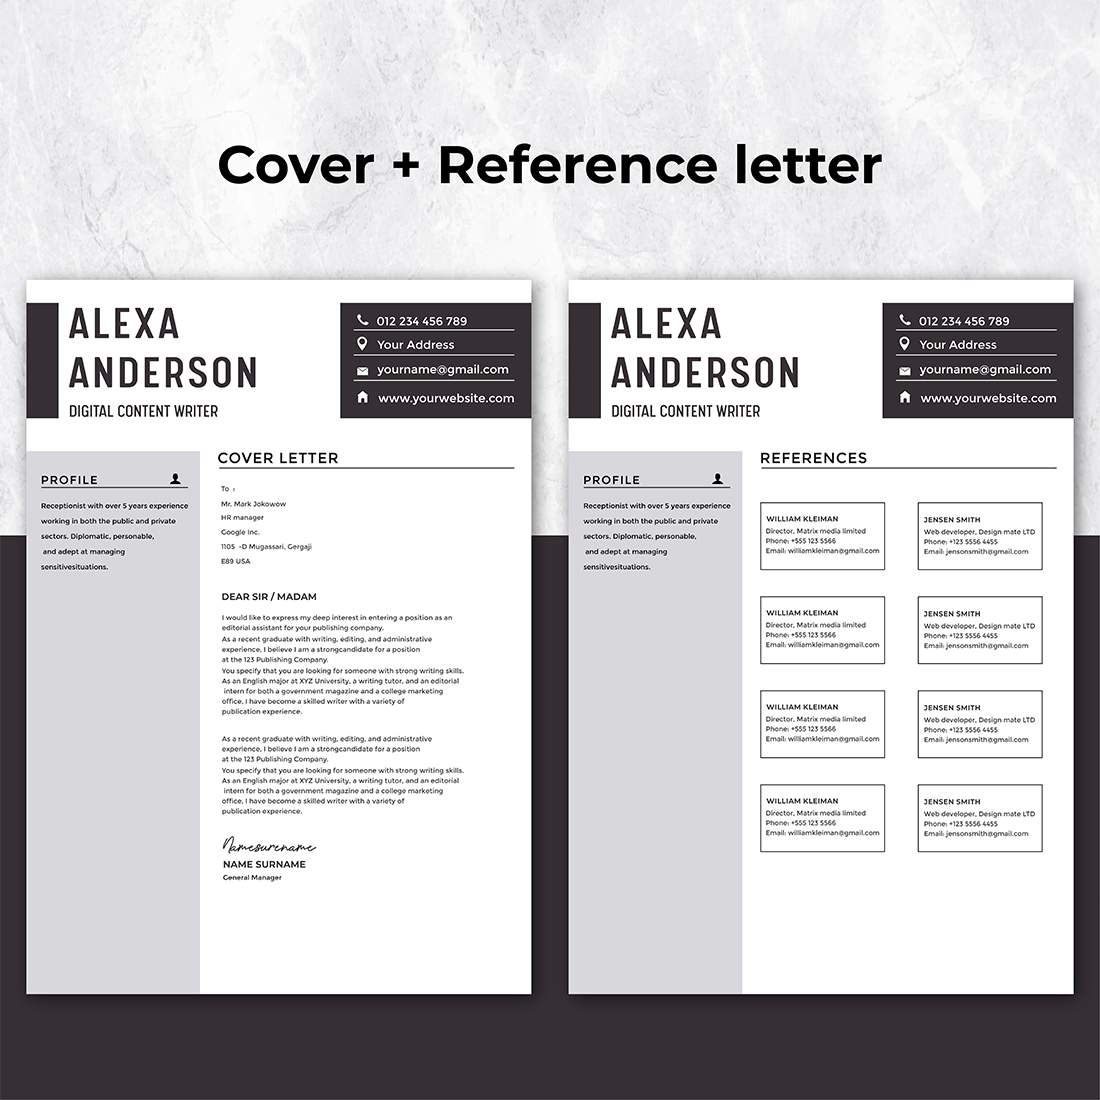 Cover letter and a reference letter for a resume.